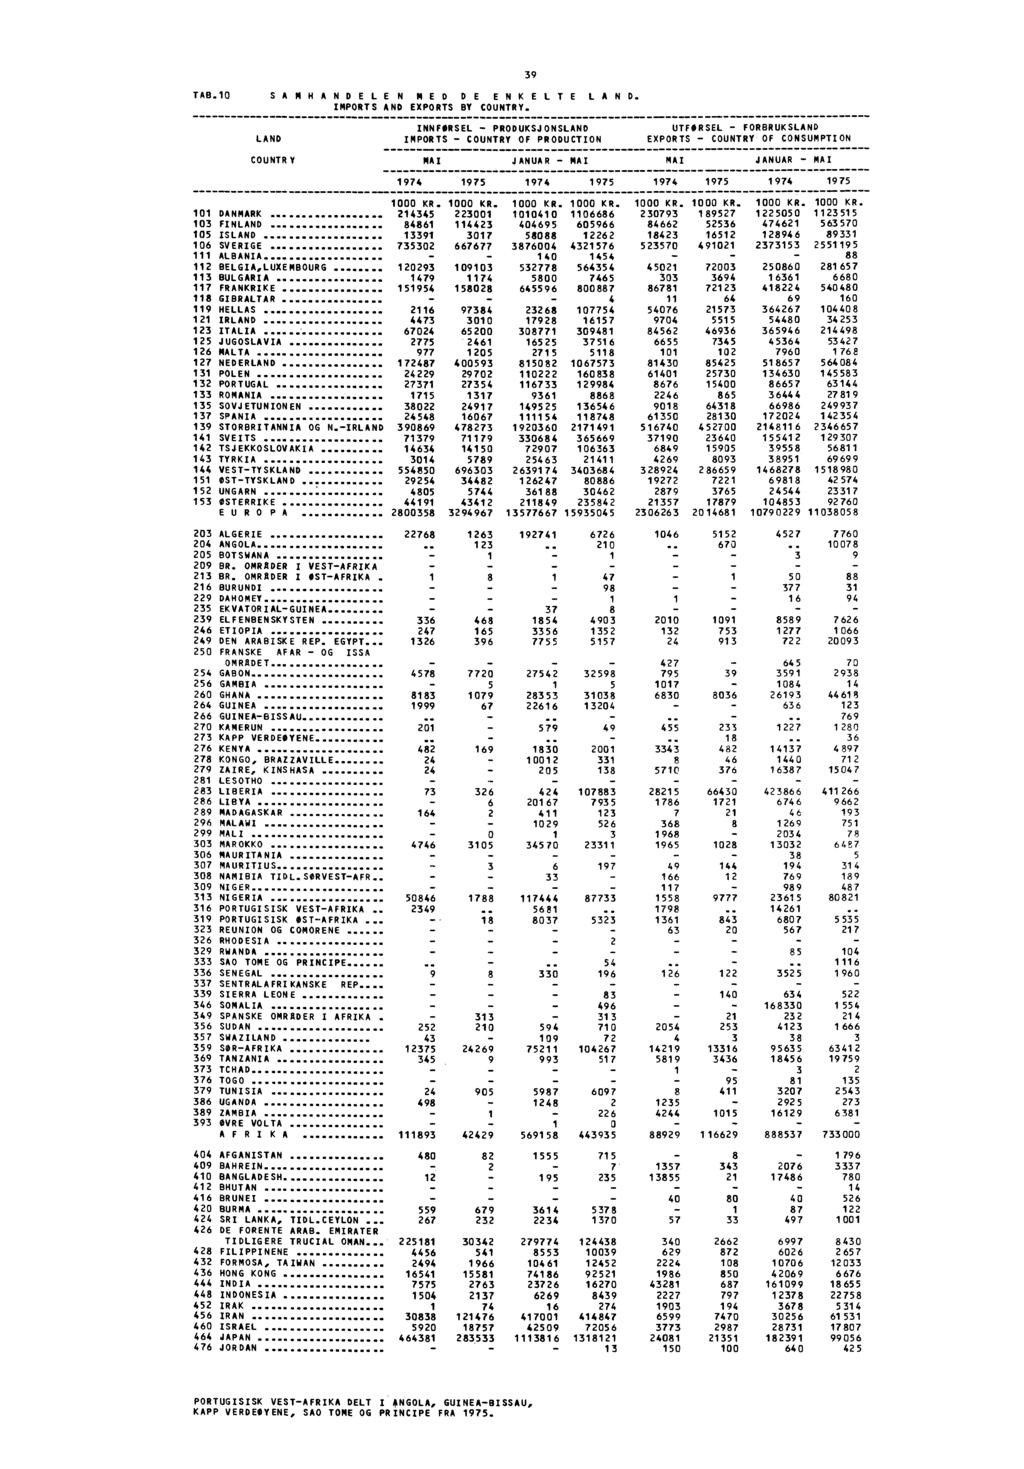 TAB.1 SAMHANDELEN NED DE ENKELTE LAN D. IMPORTS AND EXPORTS BY COUNTRY.